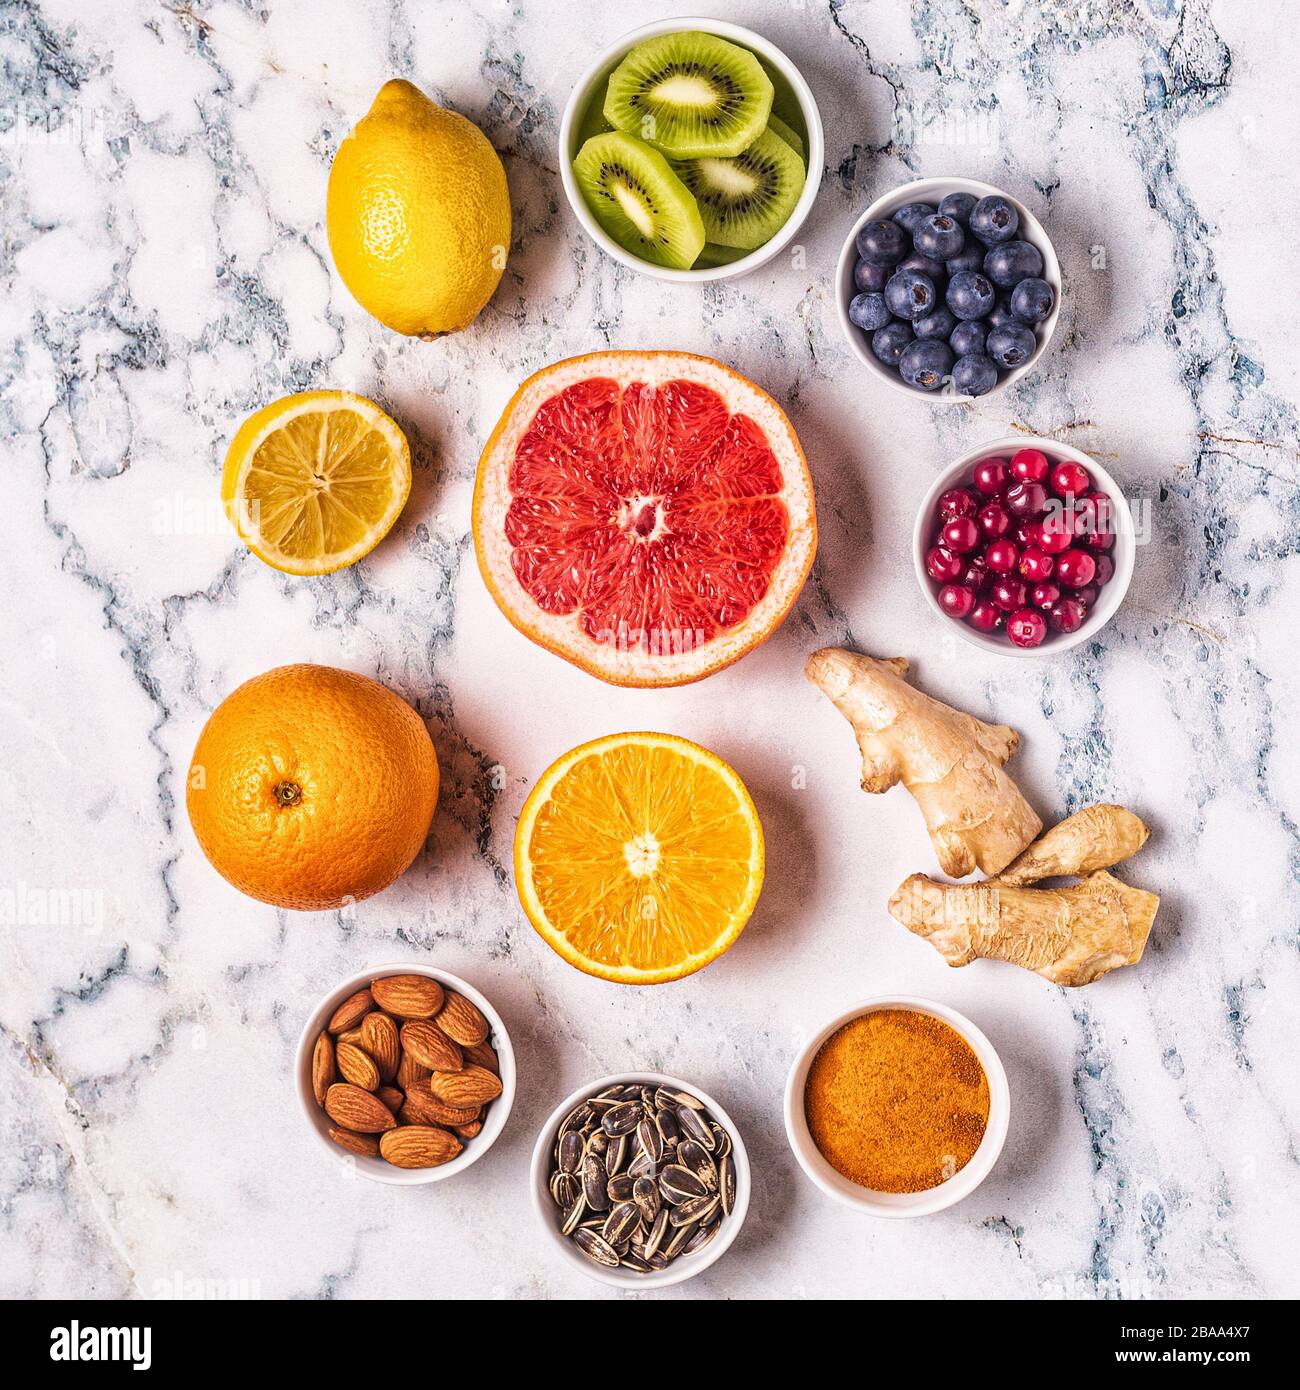 Superfoods for Immunity boosting and cold remedies, top view. Stock Photo